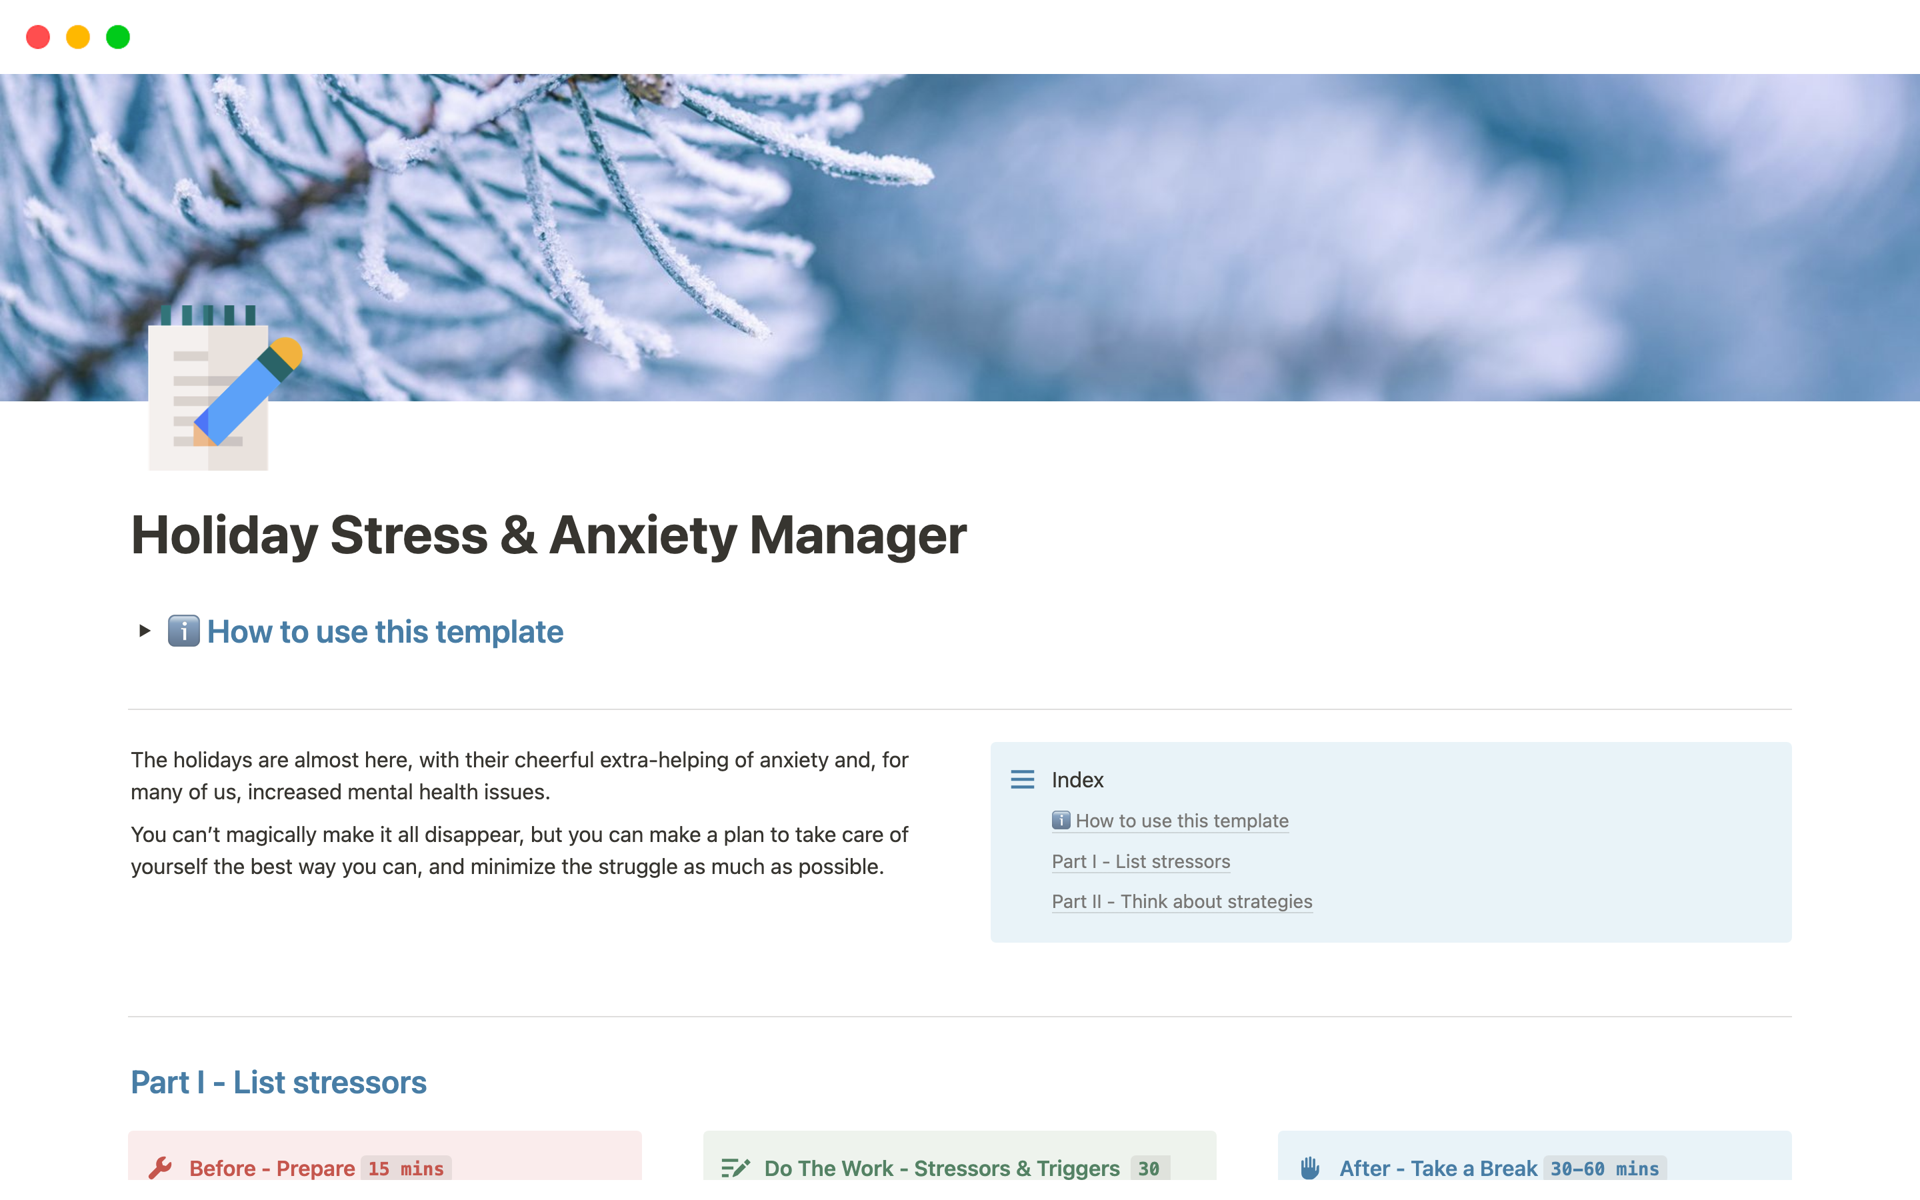 This template will help you deal with your holidays-related stress and anxiety, and figure out the best strategies to minimize or avoid them.